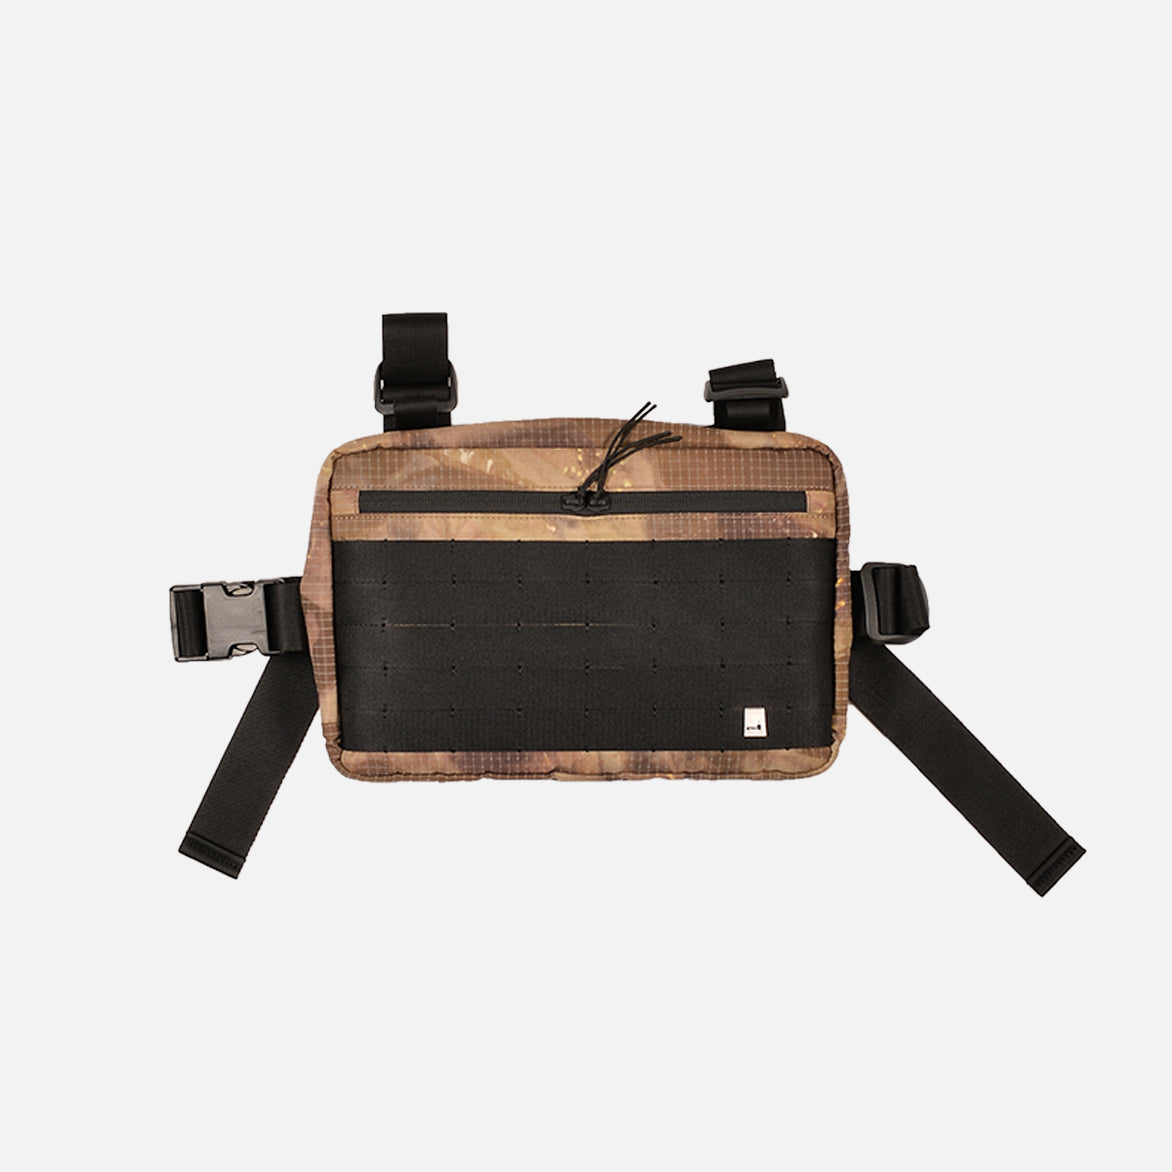 Is That The New Guys Minimalist Pocket Front Chest Rig Bag ??